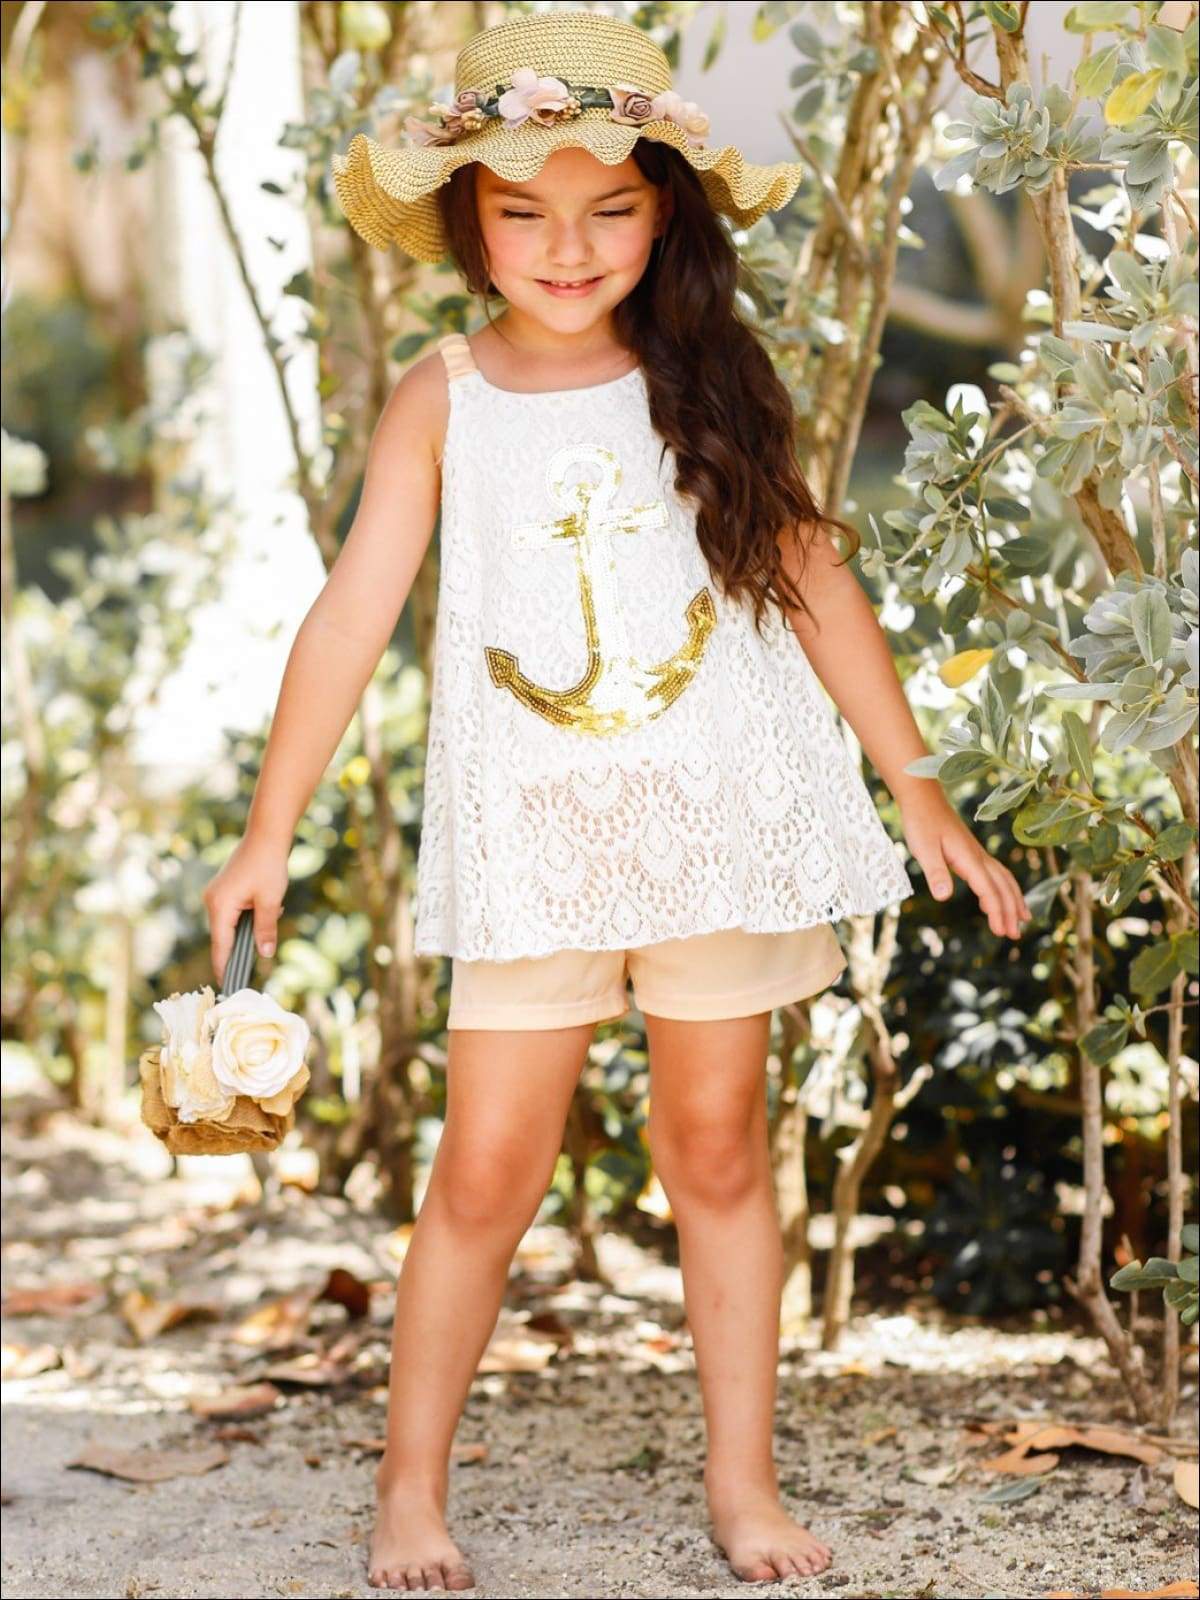 Girls Sleeveless Lace Trimmed Swing Top & Bow Shorts Set - Girls Spring Casual Set